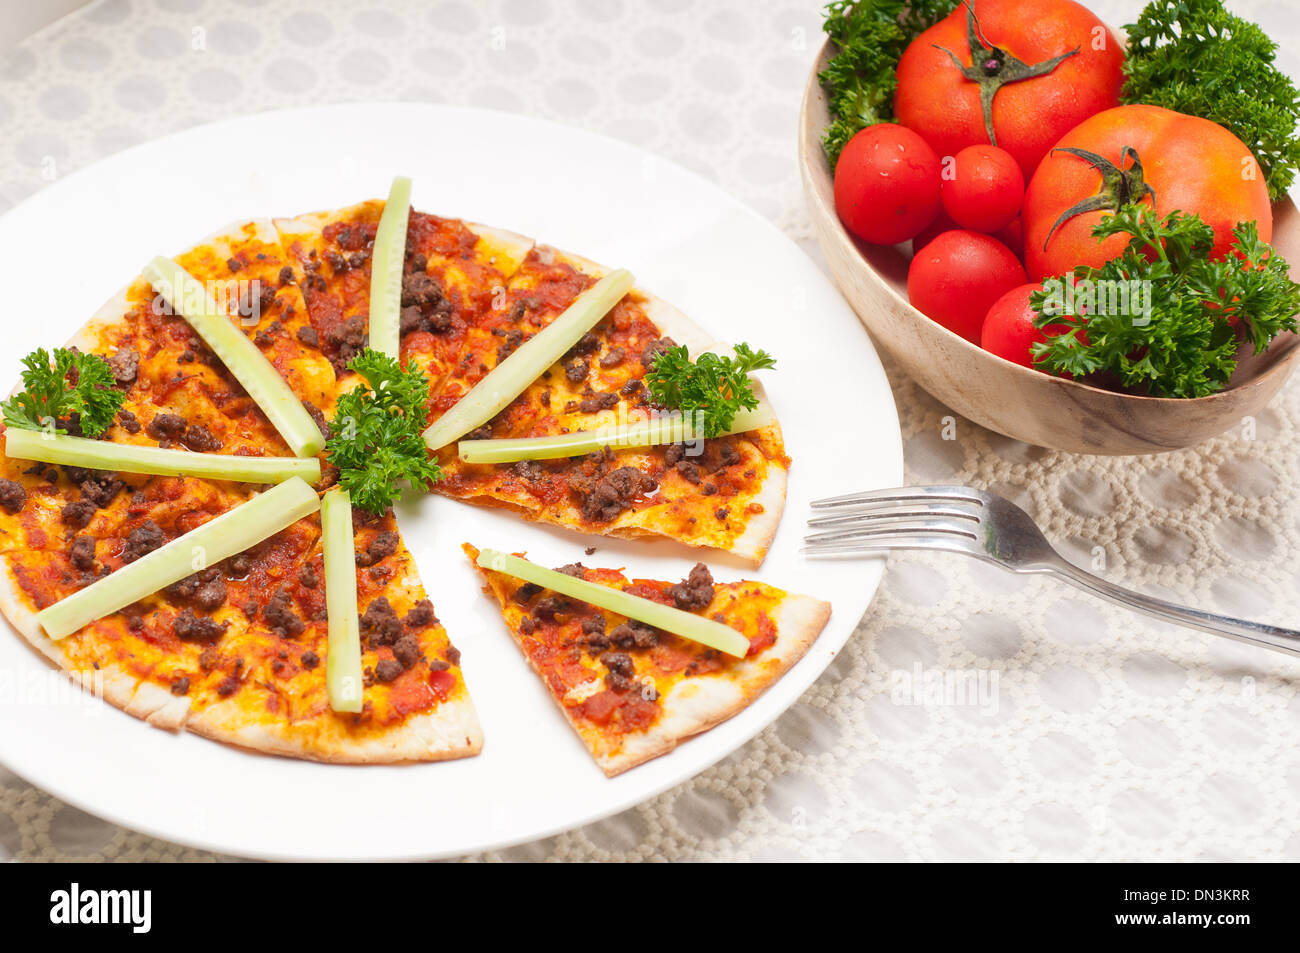 fresh baked Turkish beef pizza with cucumber on top Stock Photo